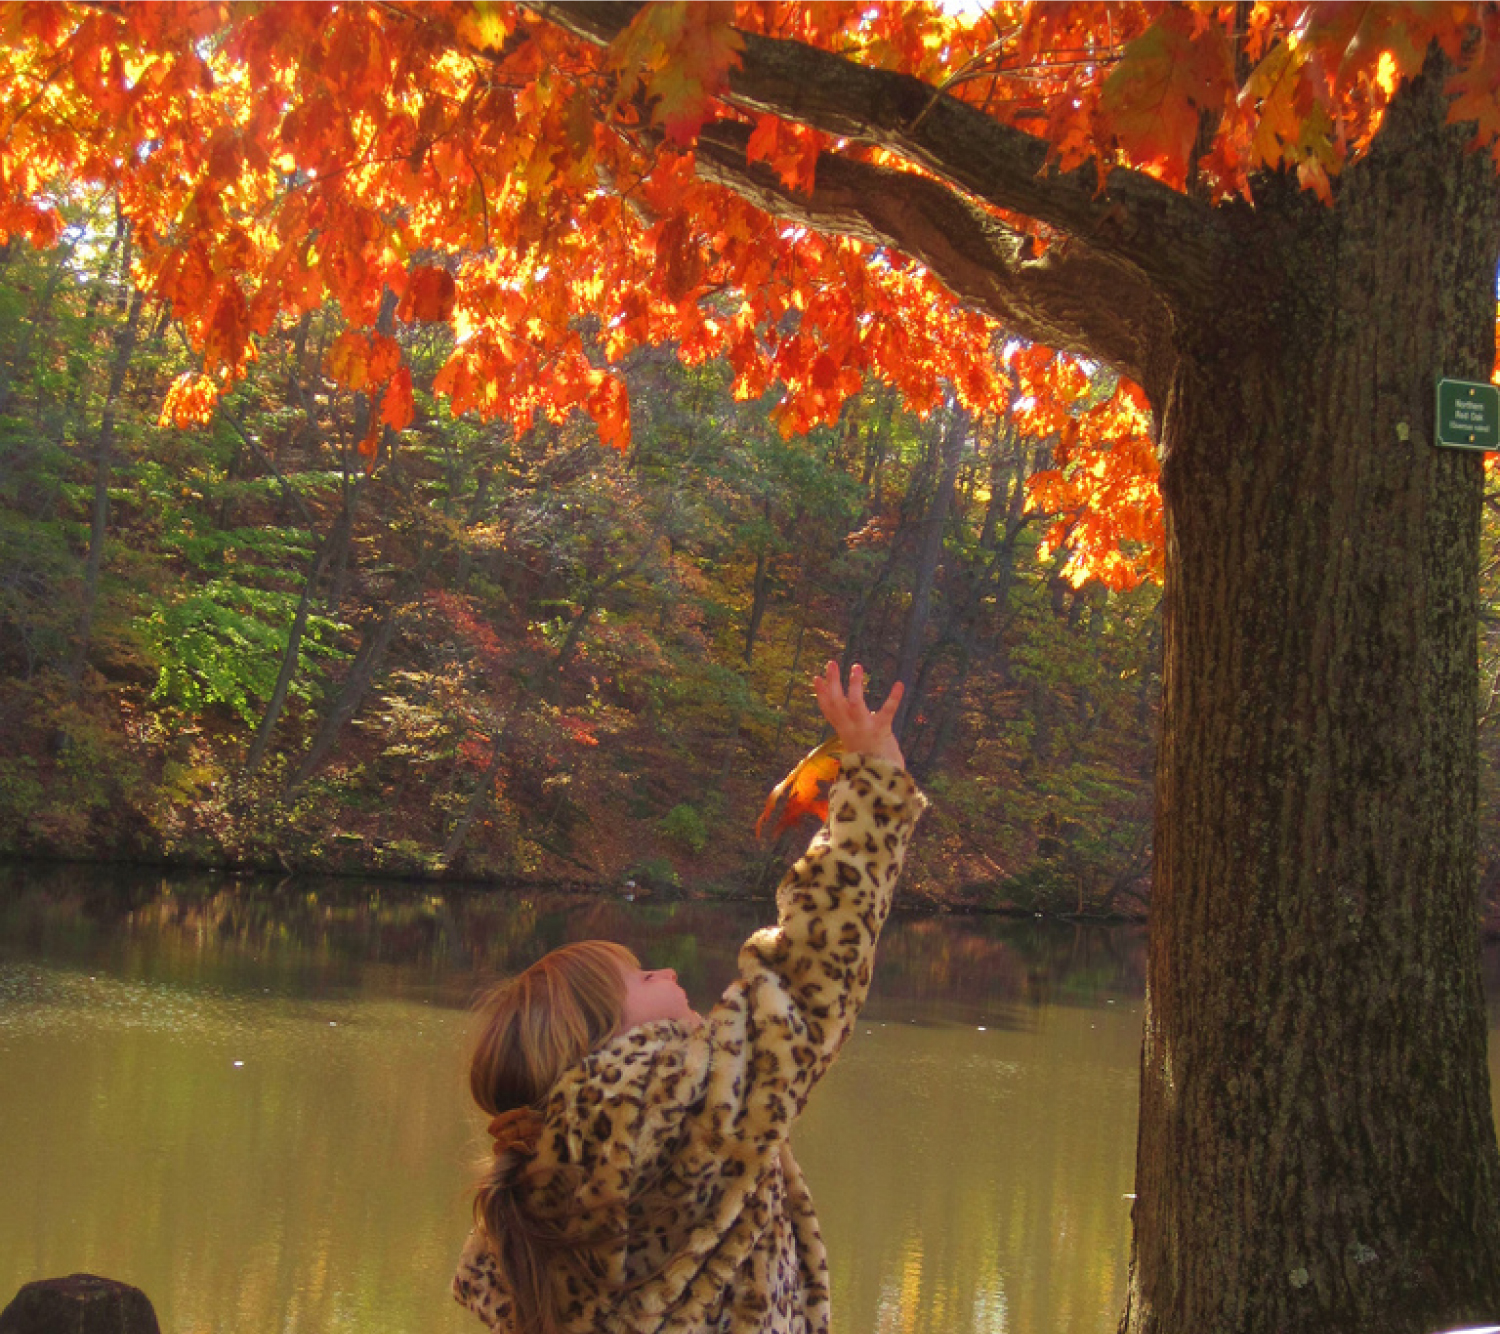 This photo shows a young girl reaching for an orange leaf on an oak tree. She is on a walkway near a creek. The opposite shore is a deep slope covered with more trees in autumn colors.